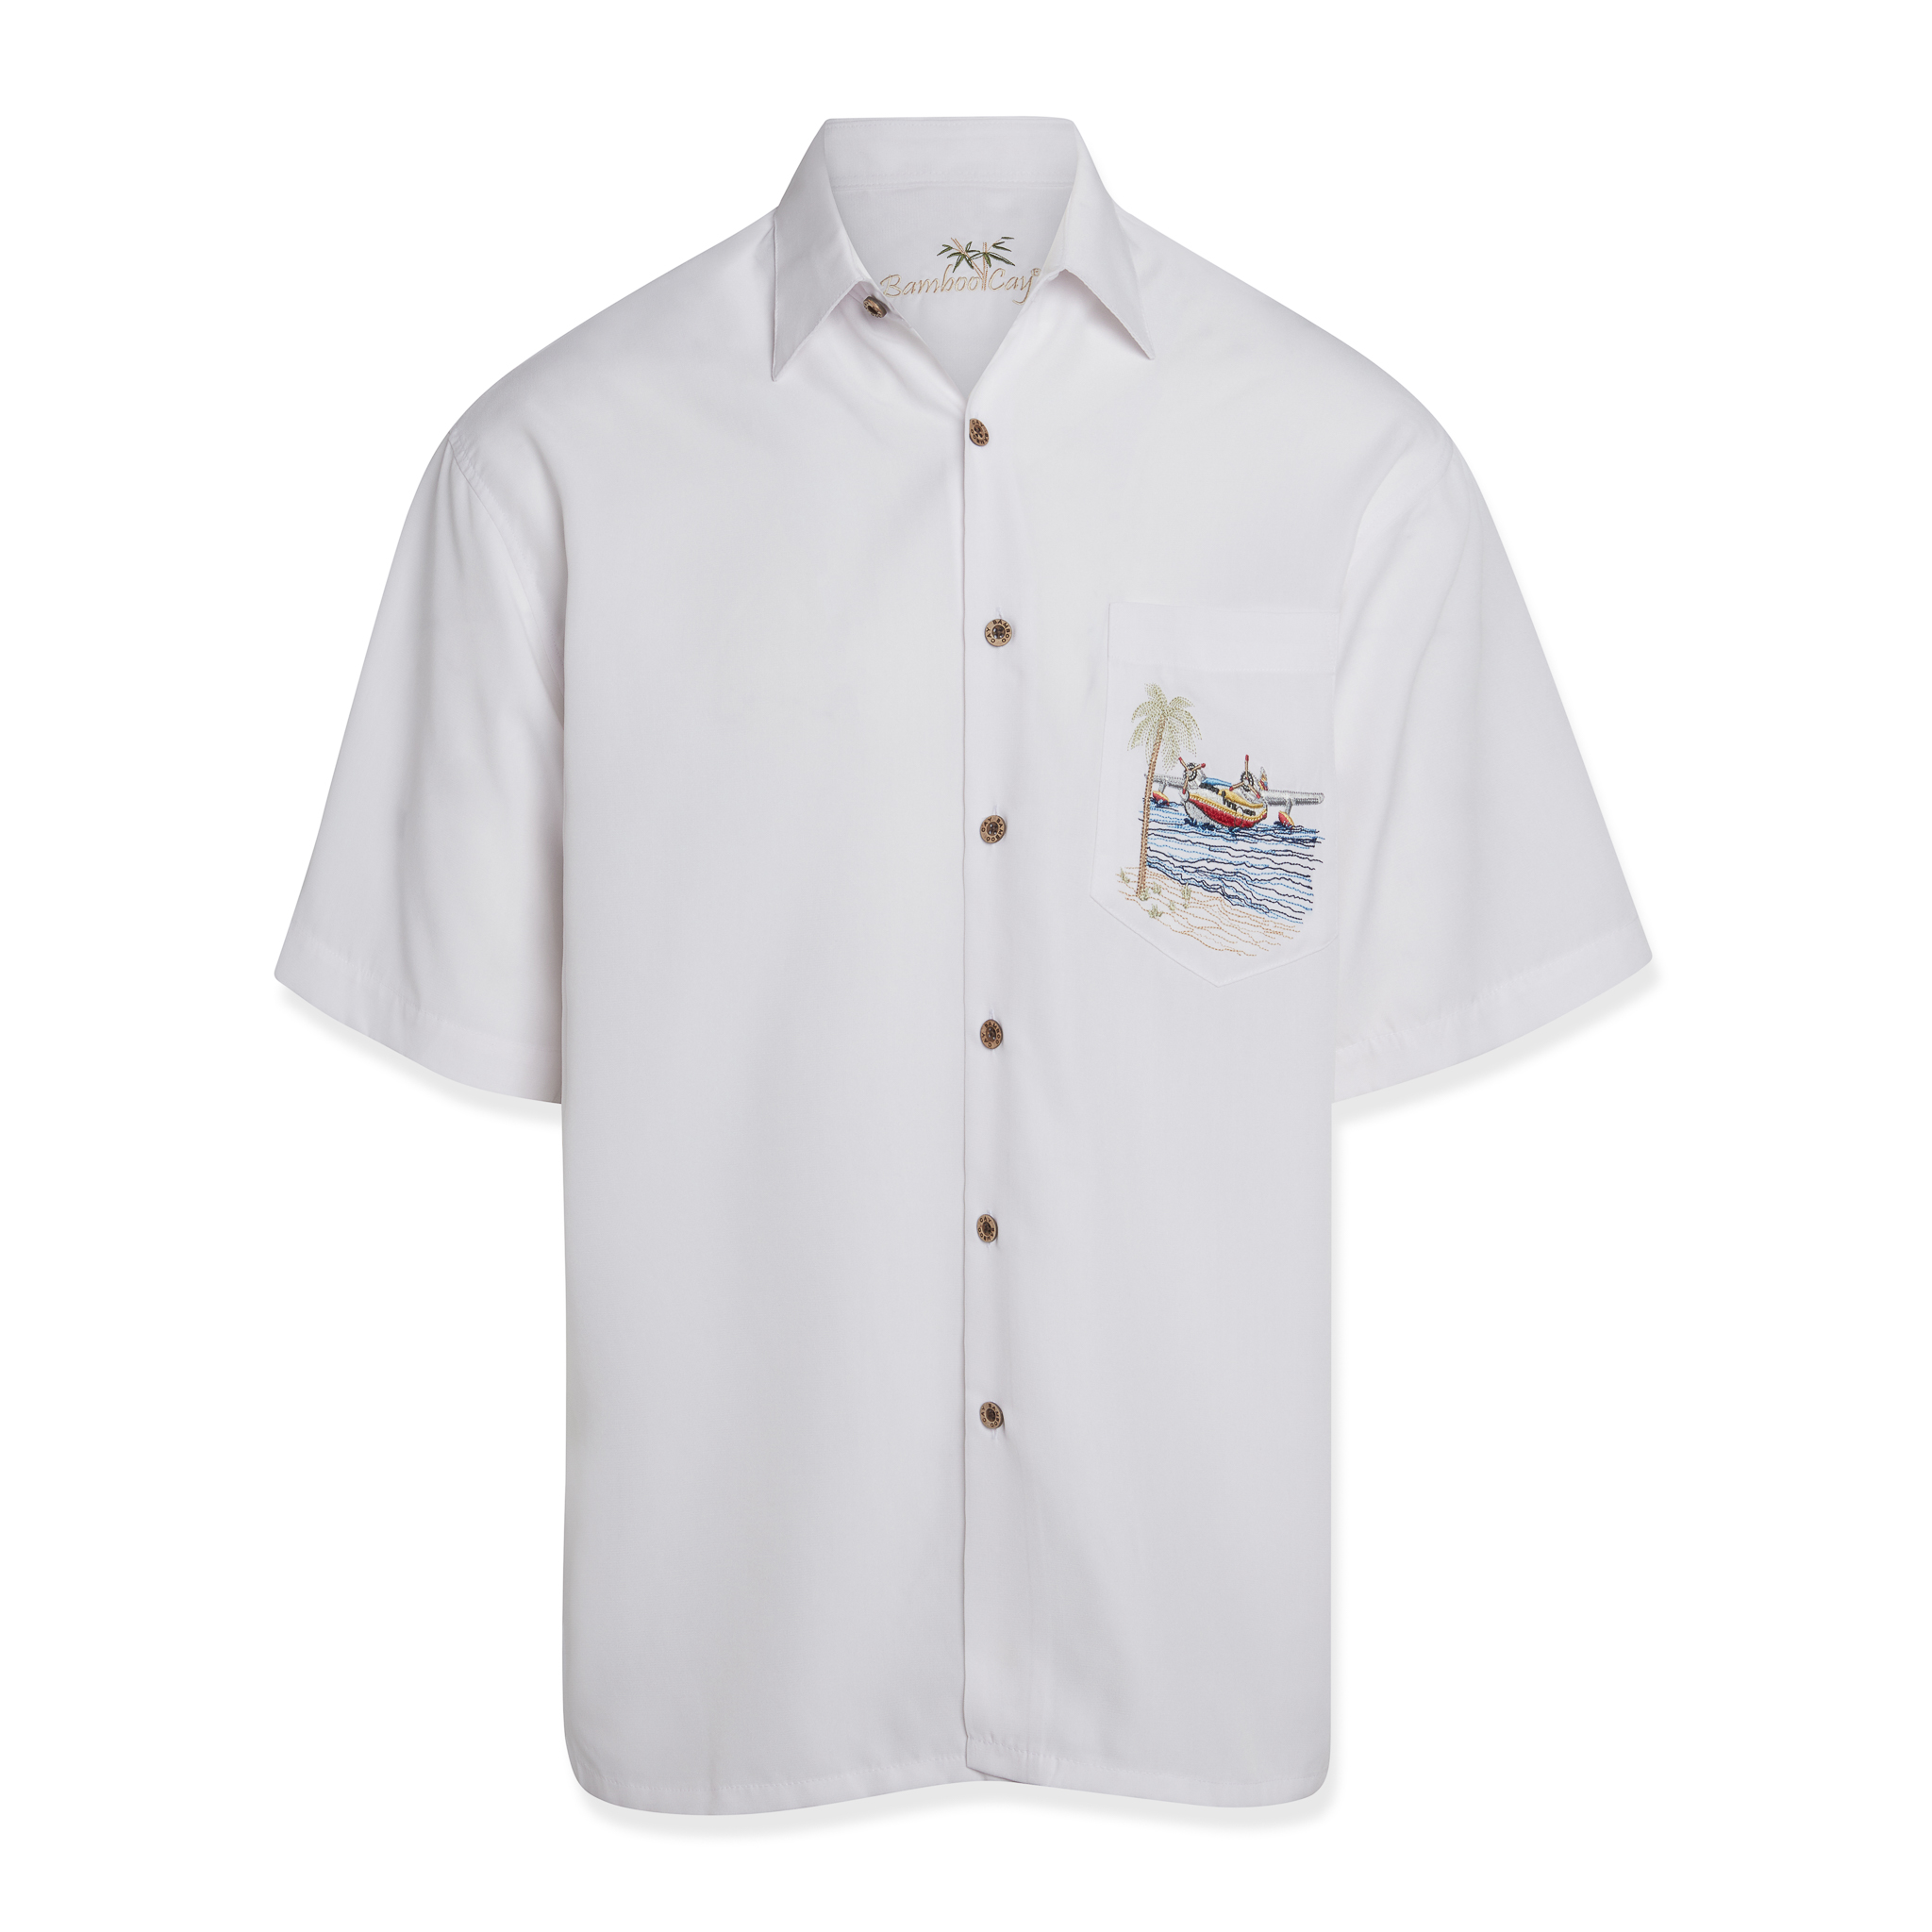 bamboo cay catch of the day short sleeve button down shirt